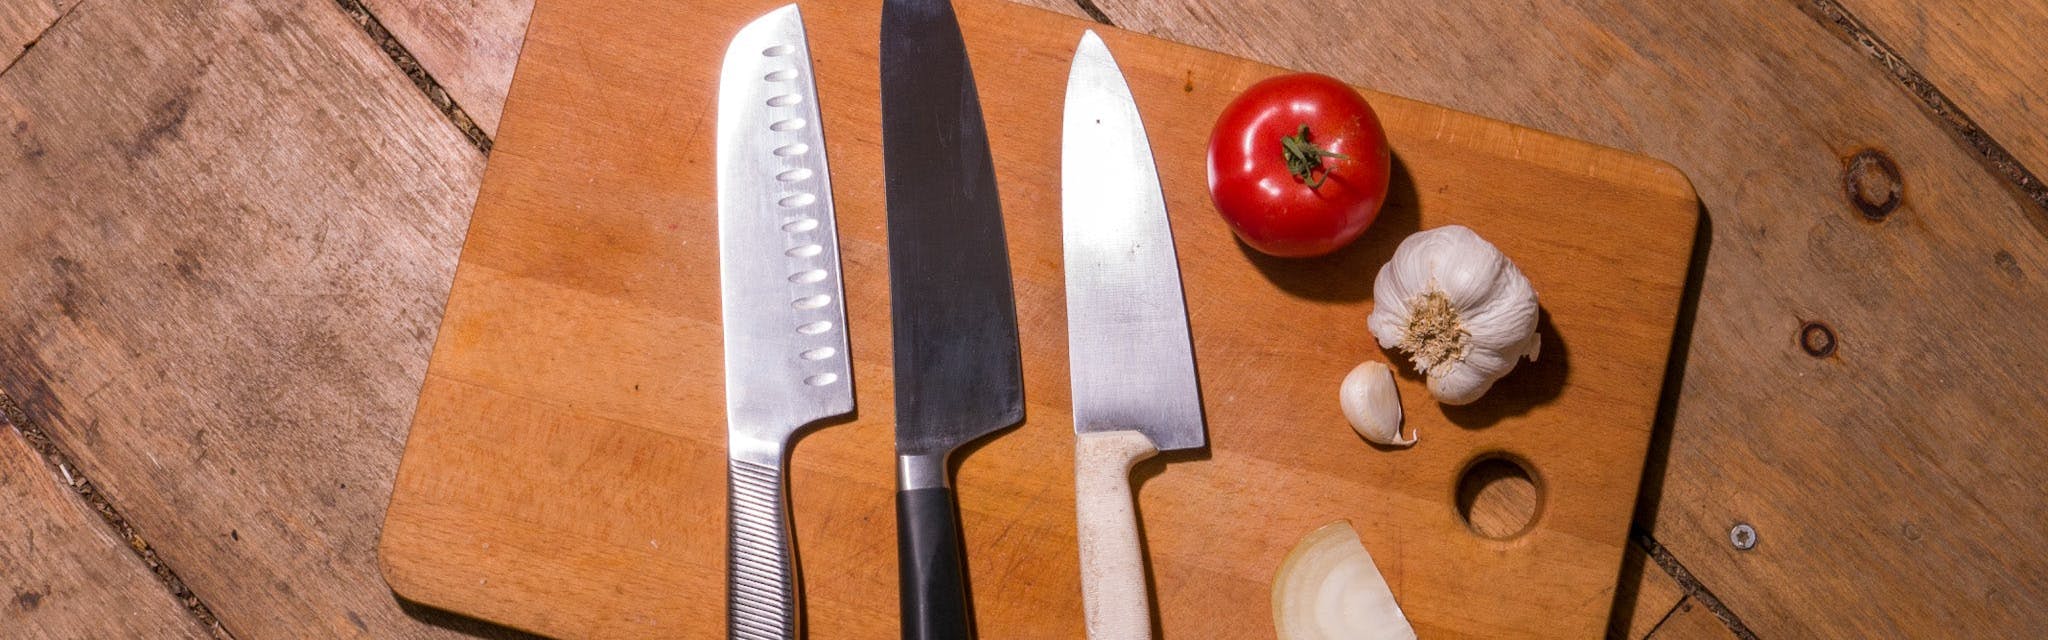 Review: Steelport's Chef Knife Is an Outstanding Blade for Your